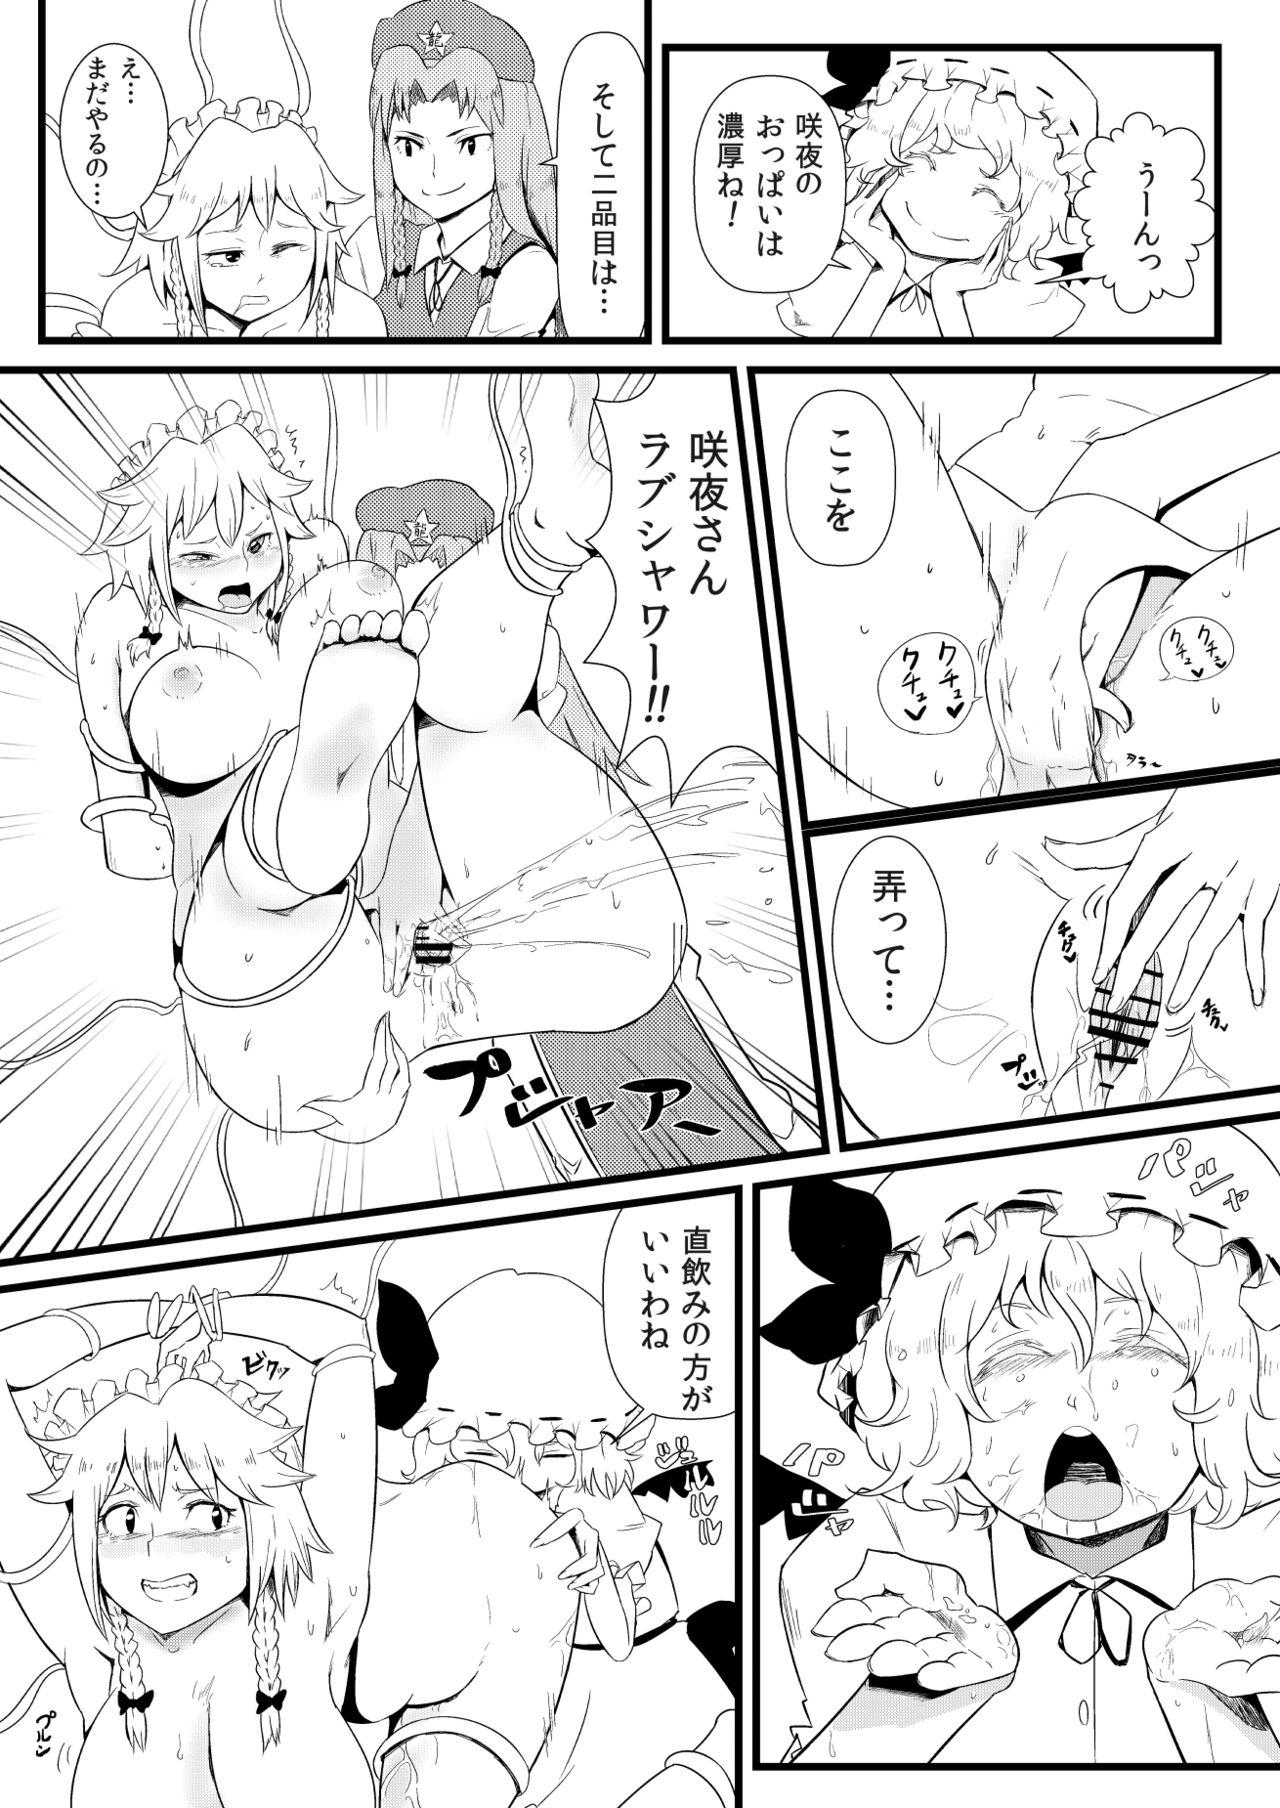 Perfect Tits 東方板としあき合同誌5 - Touhou project Real Amateur - Page 7